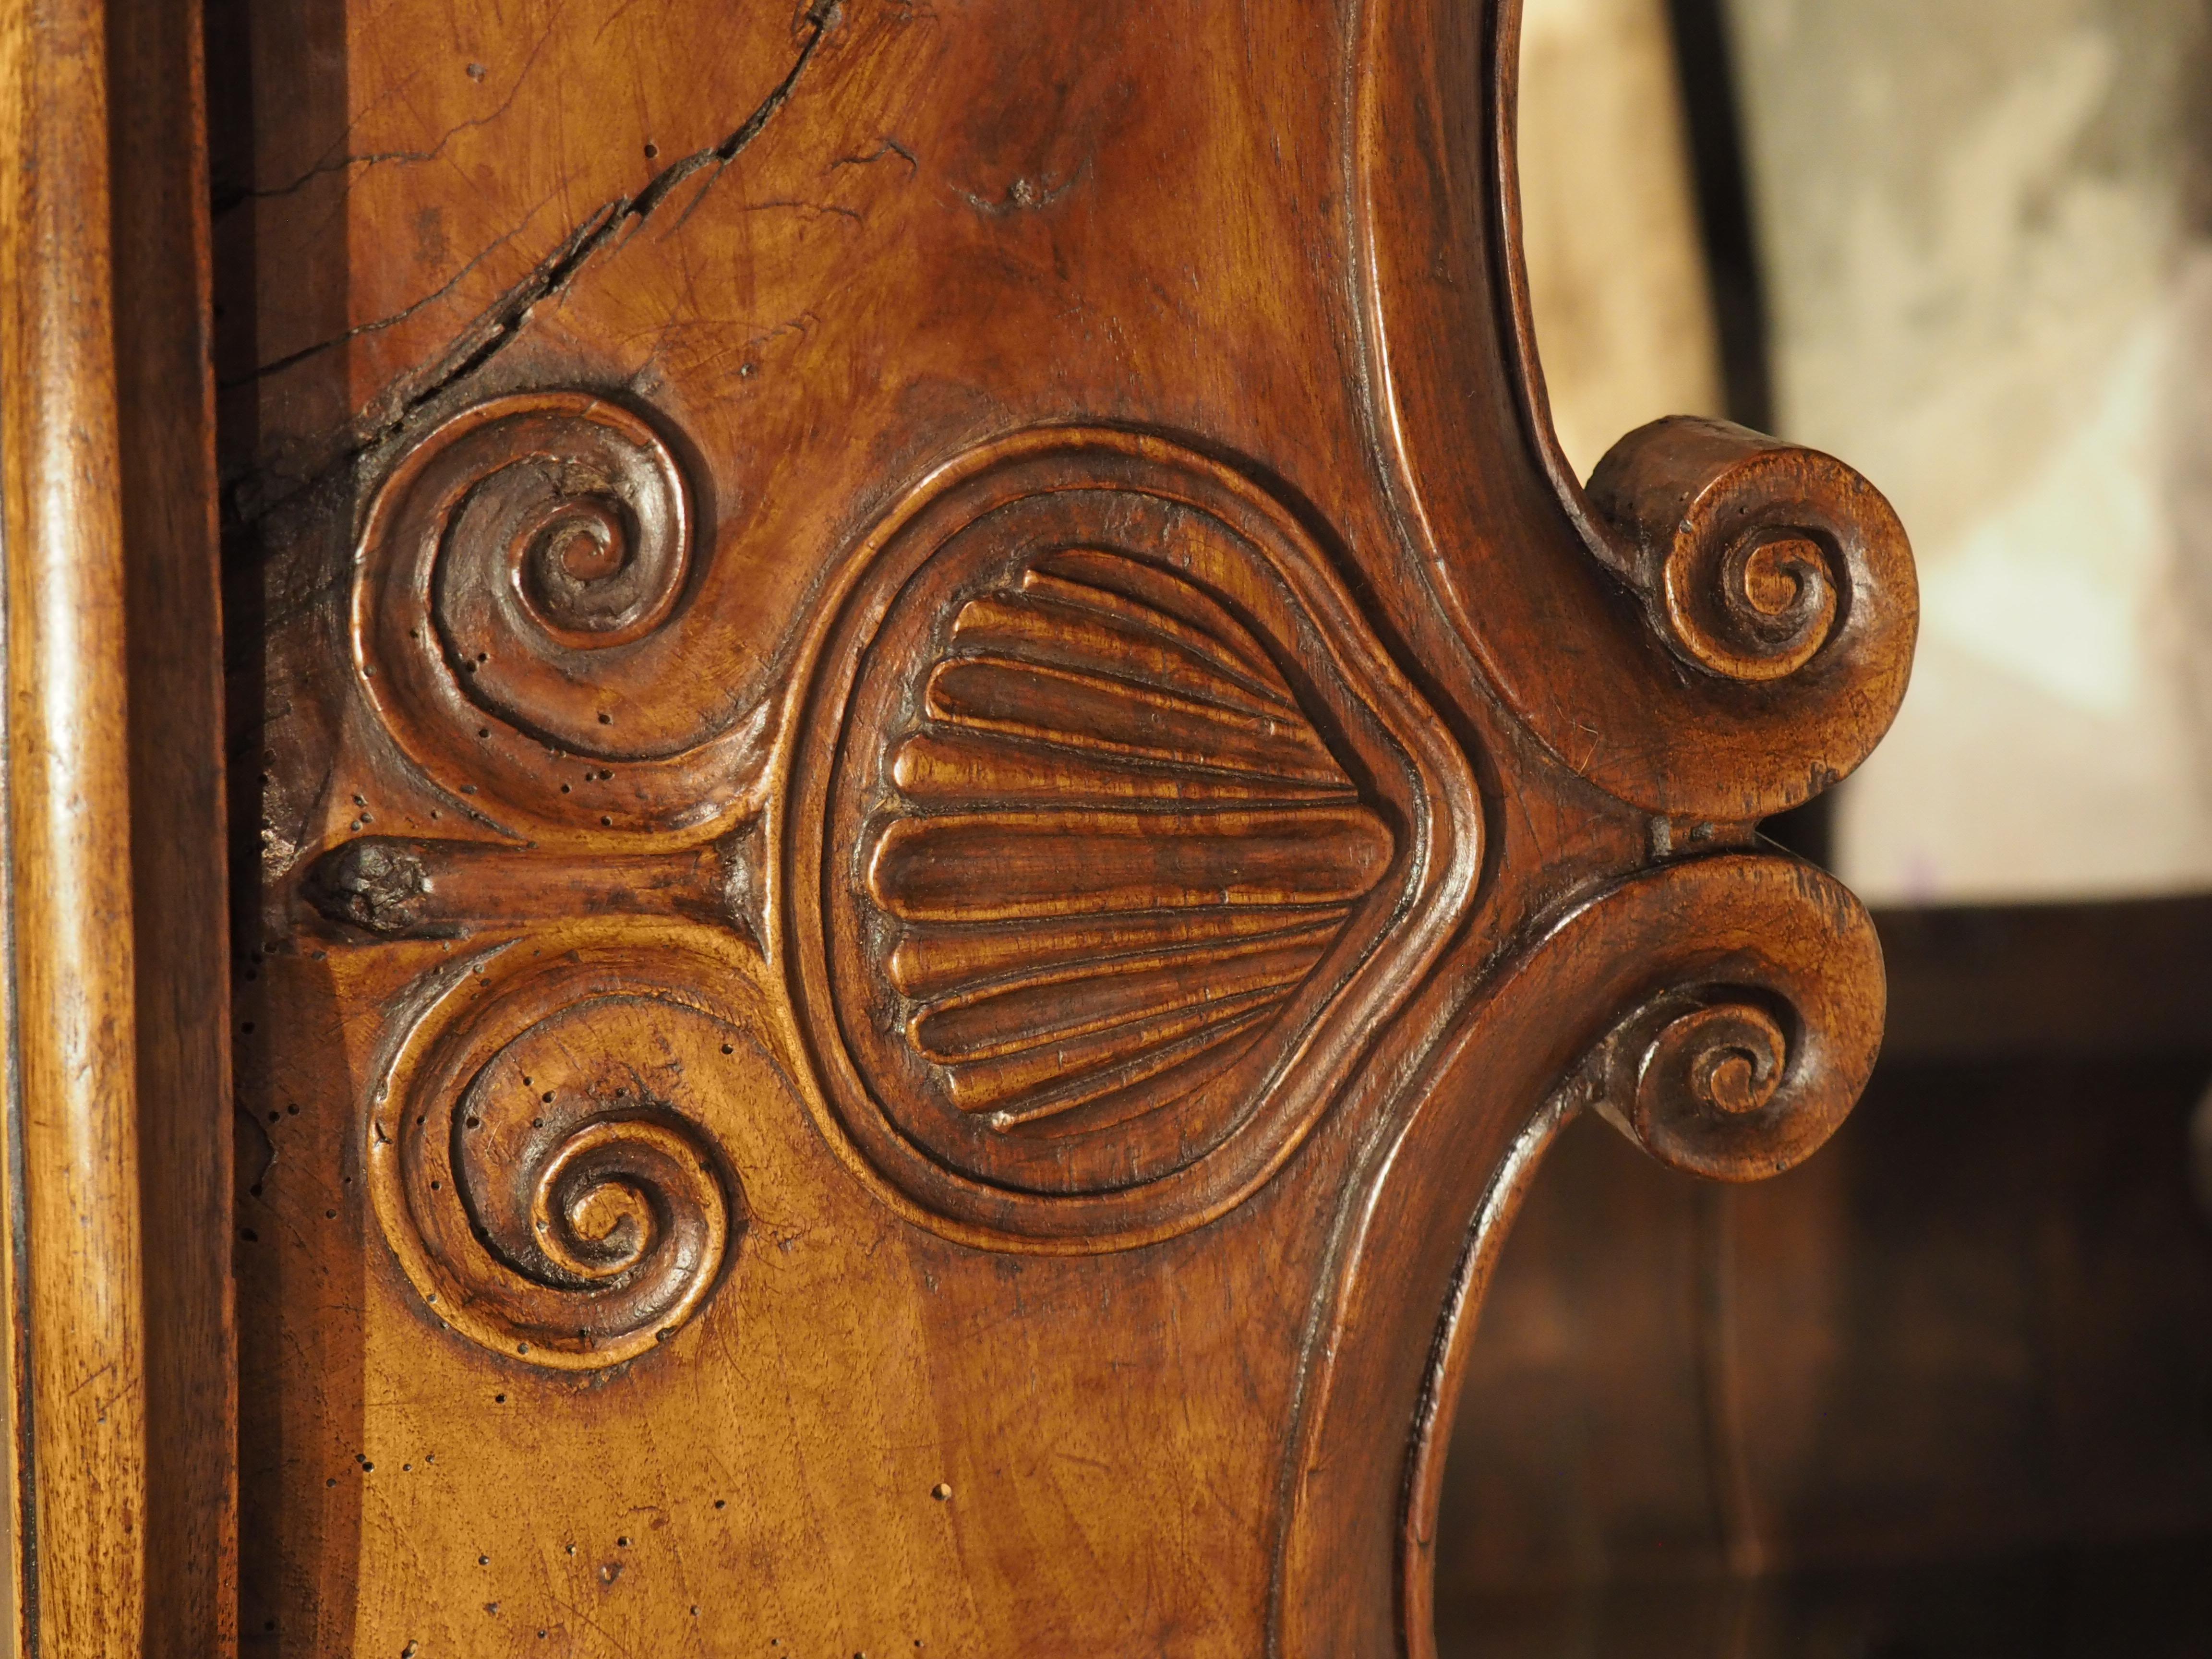 Hand-Carved 18th Century Carved Walnut Fireplace Mantel from Burgundy, France